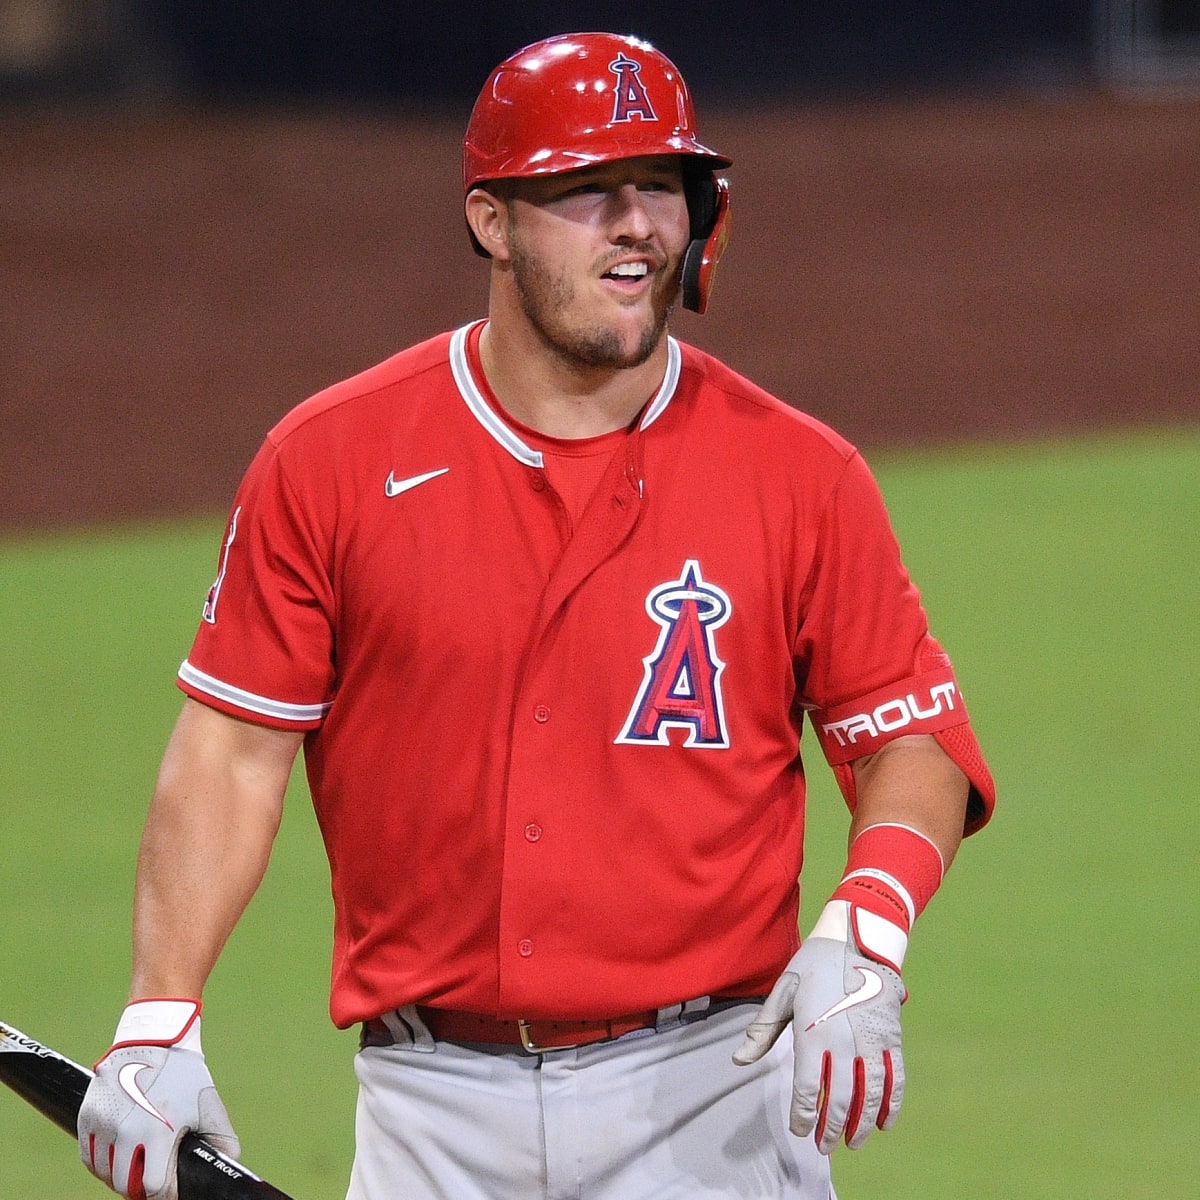 Mike Trout coming to Philly next season as Phillies' 2020 schedule is  announced